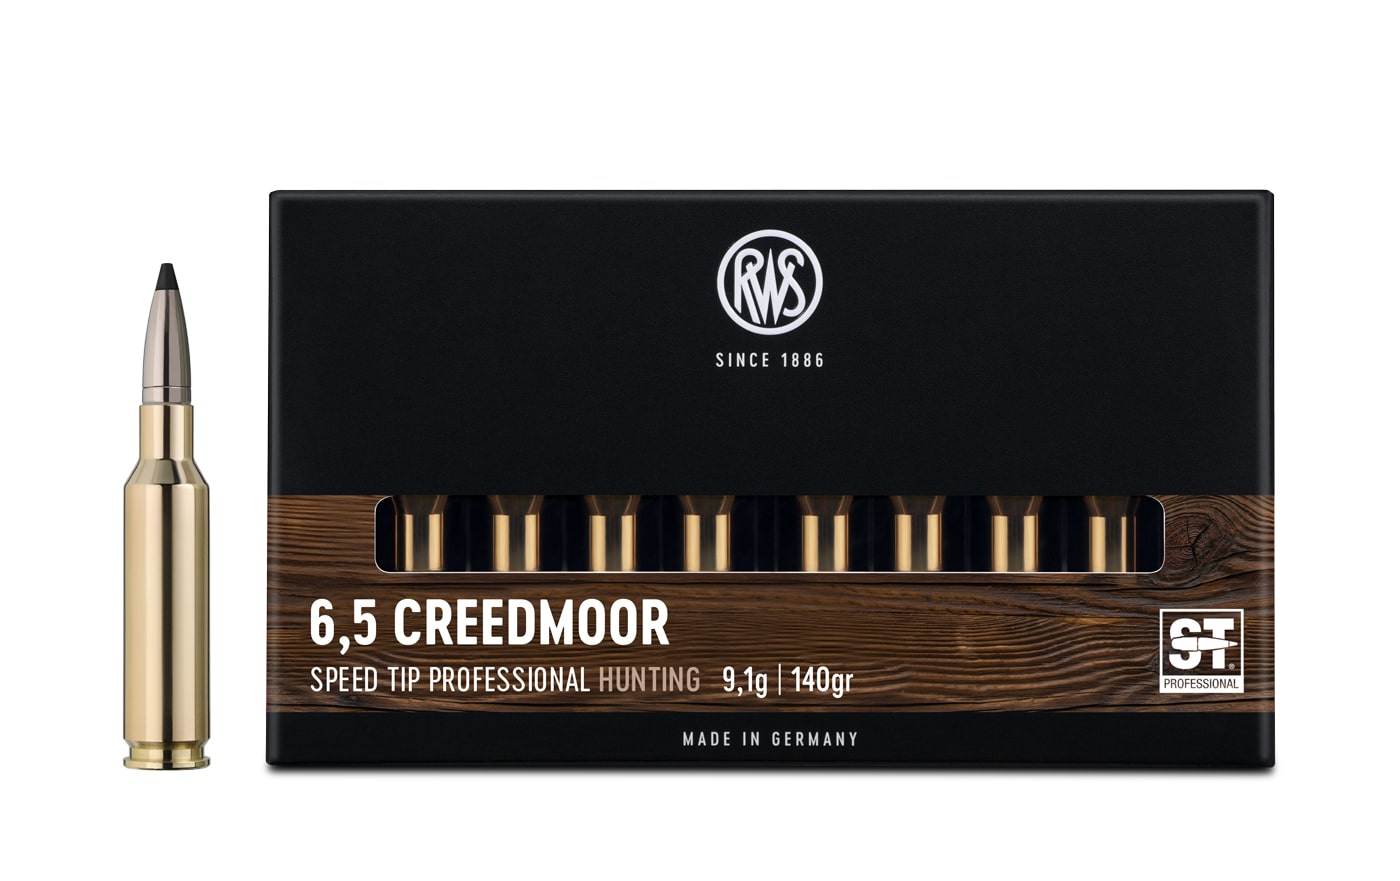 Packaging of the RWS 6,5 Creedmoor SPEED TIP PROFESSIONAL together with a rifle cartridge